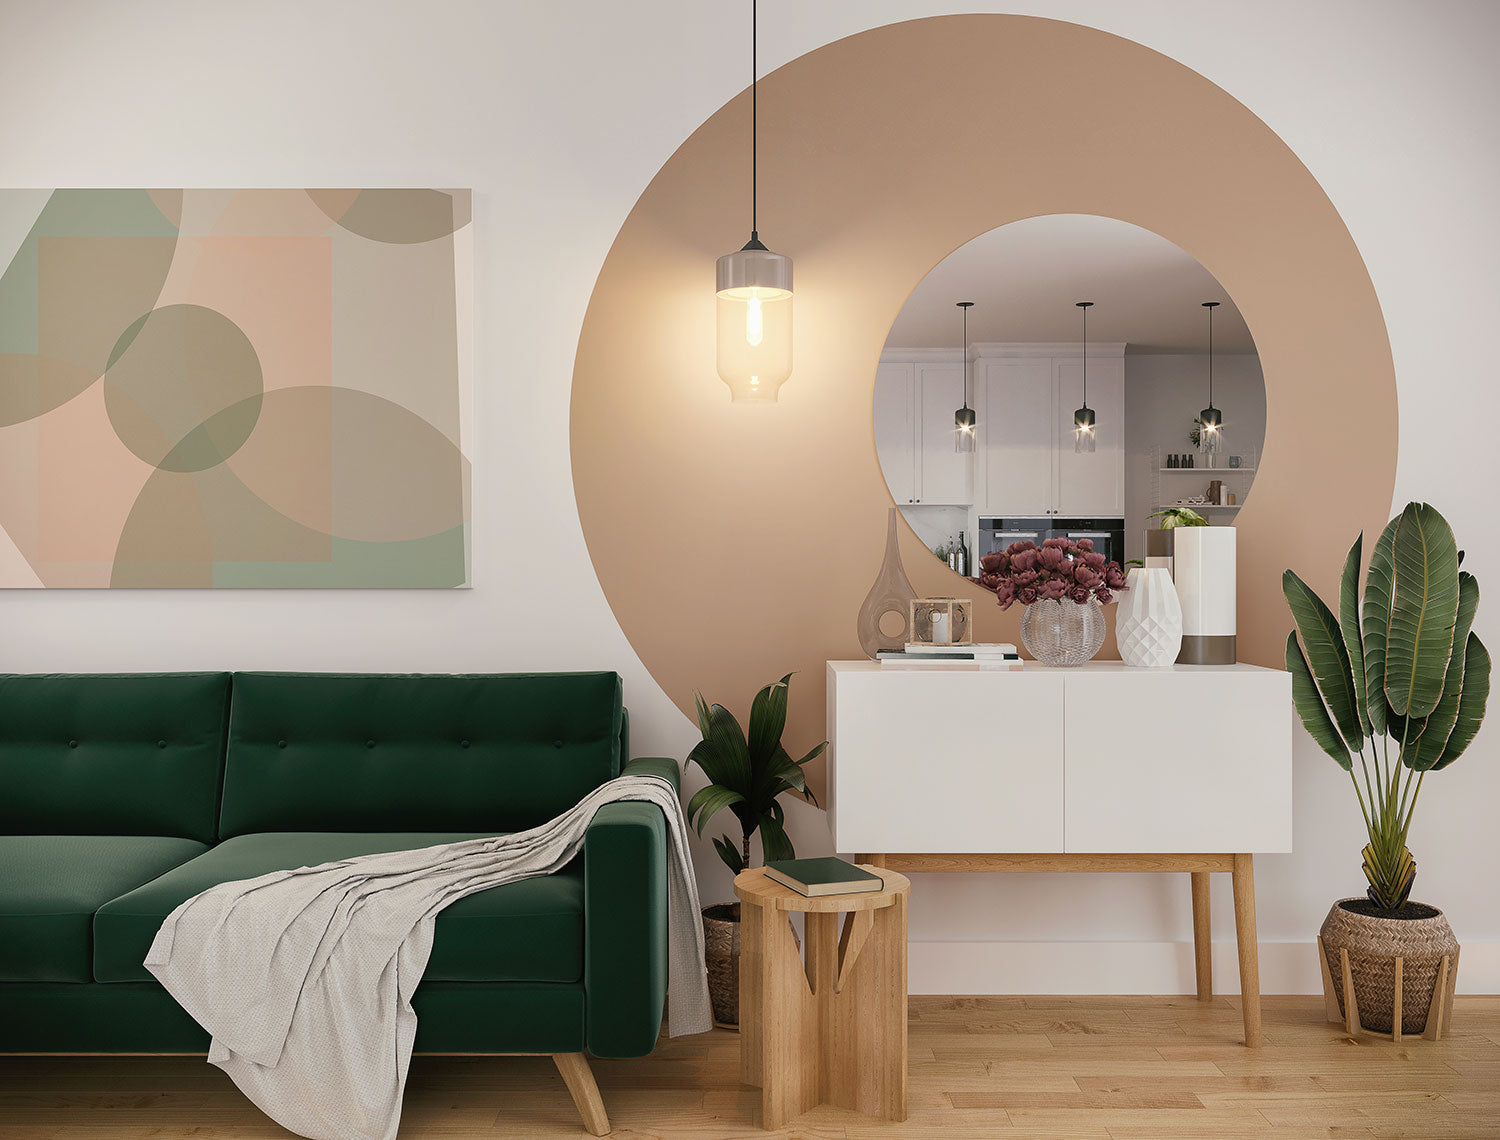 Round mirror above white modern table next to forest green couch